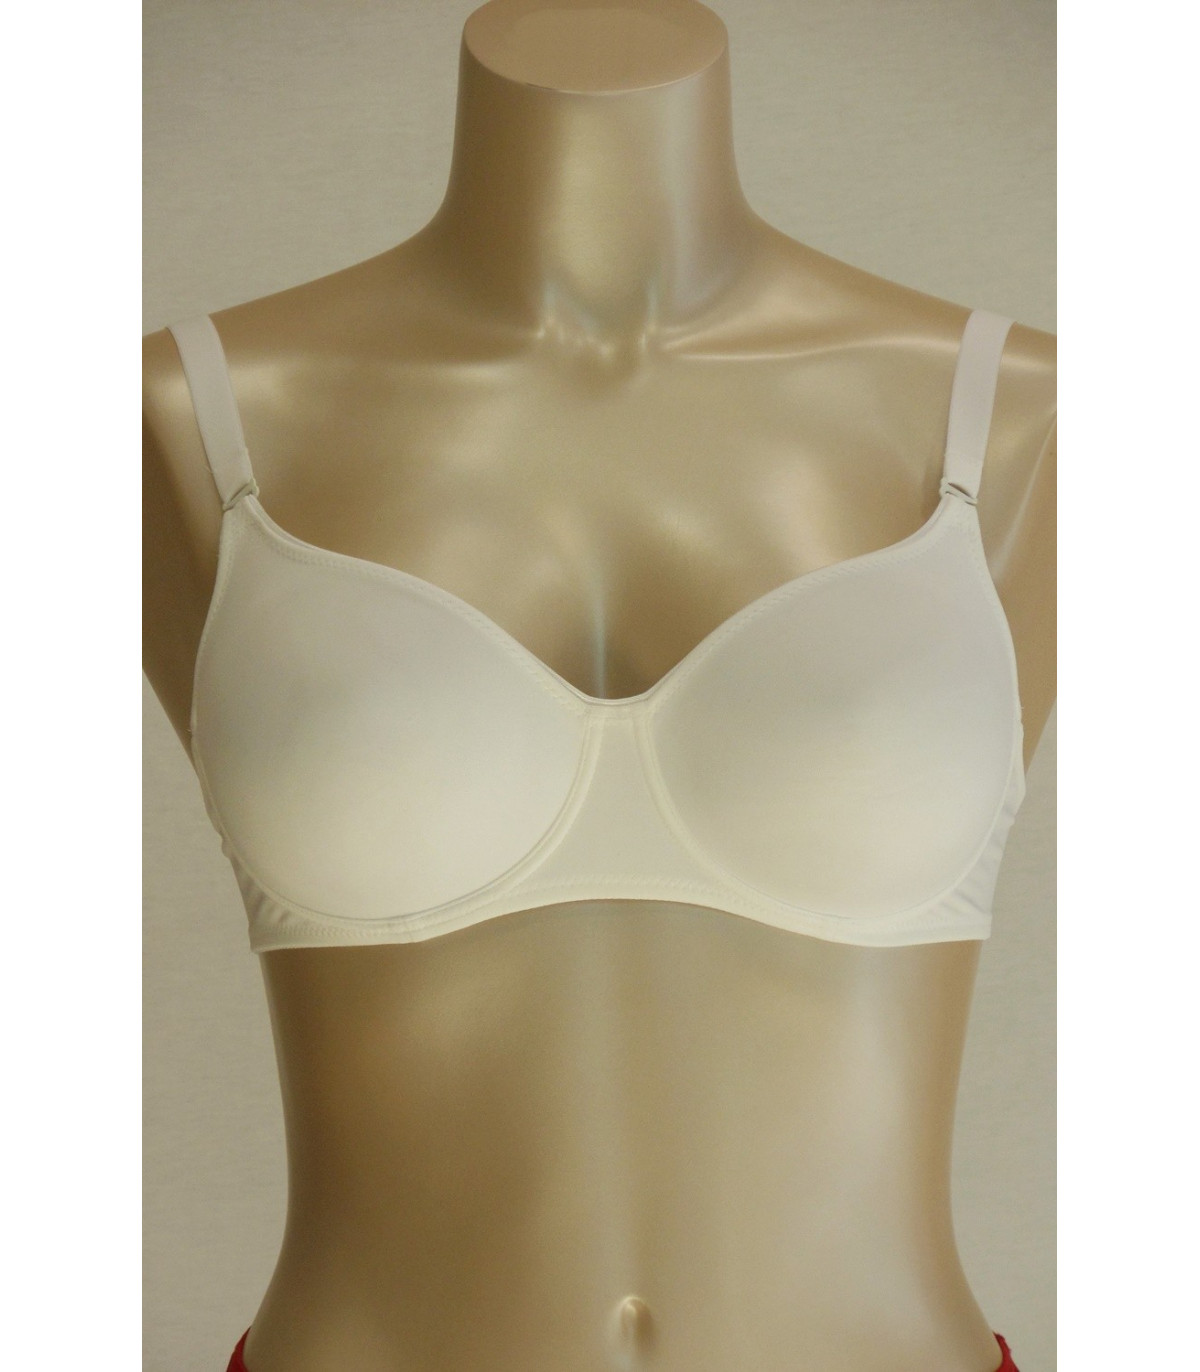 https://aldipa.gr/eshop/3304-superlarge_default_2x/soft-underwired-bra-ideal-for-tight-fitting-clothes-5483.jpg